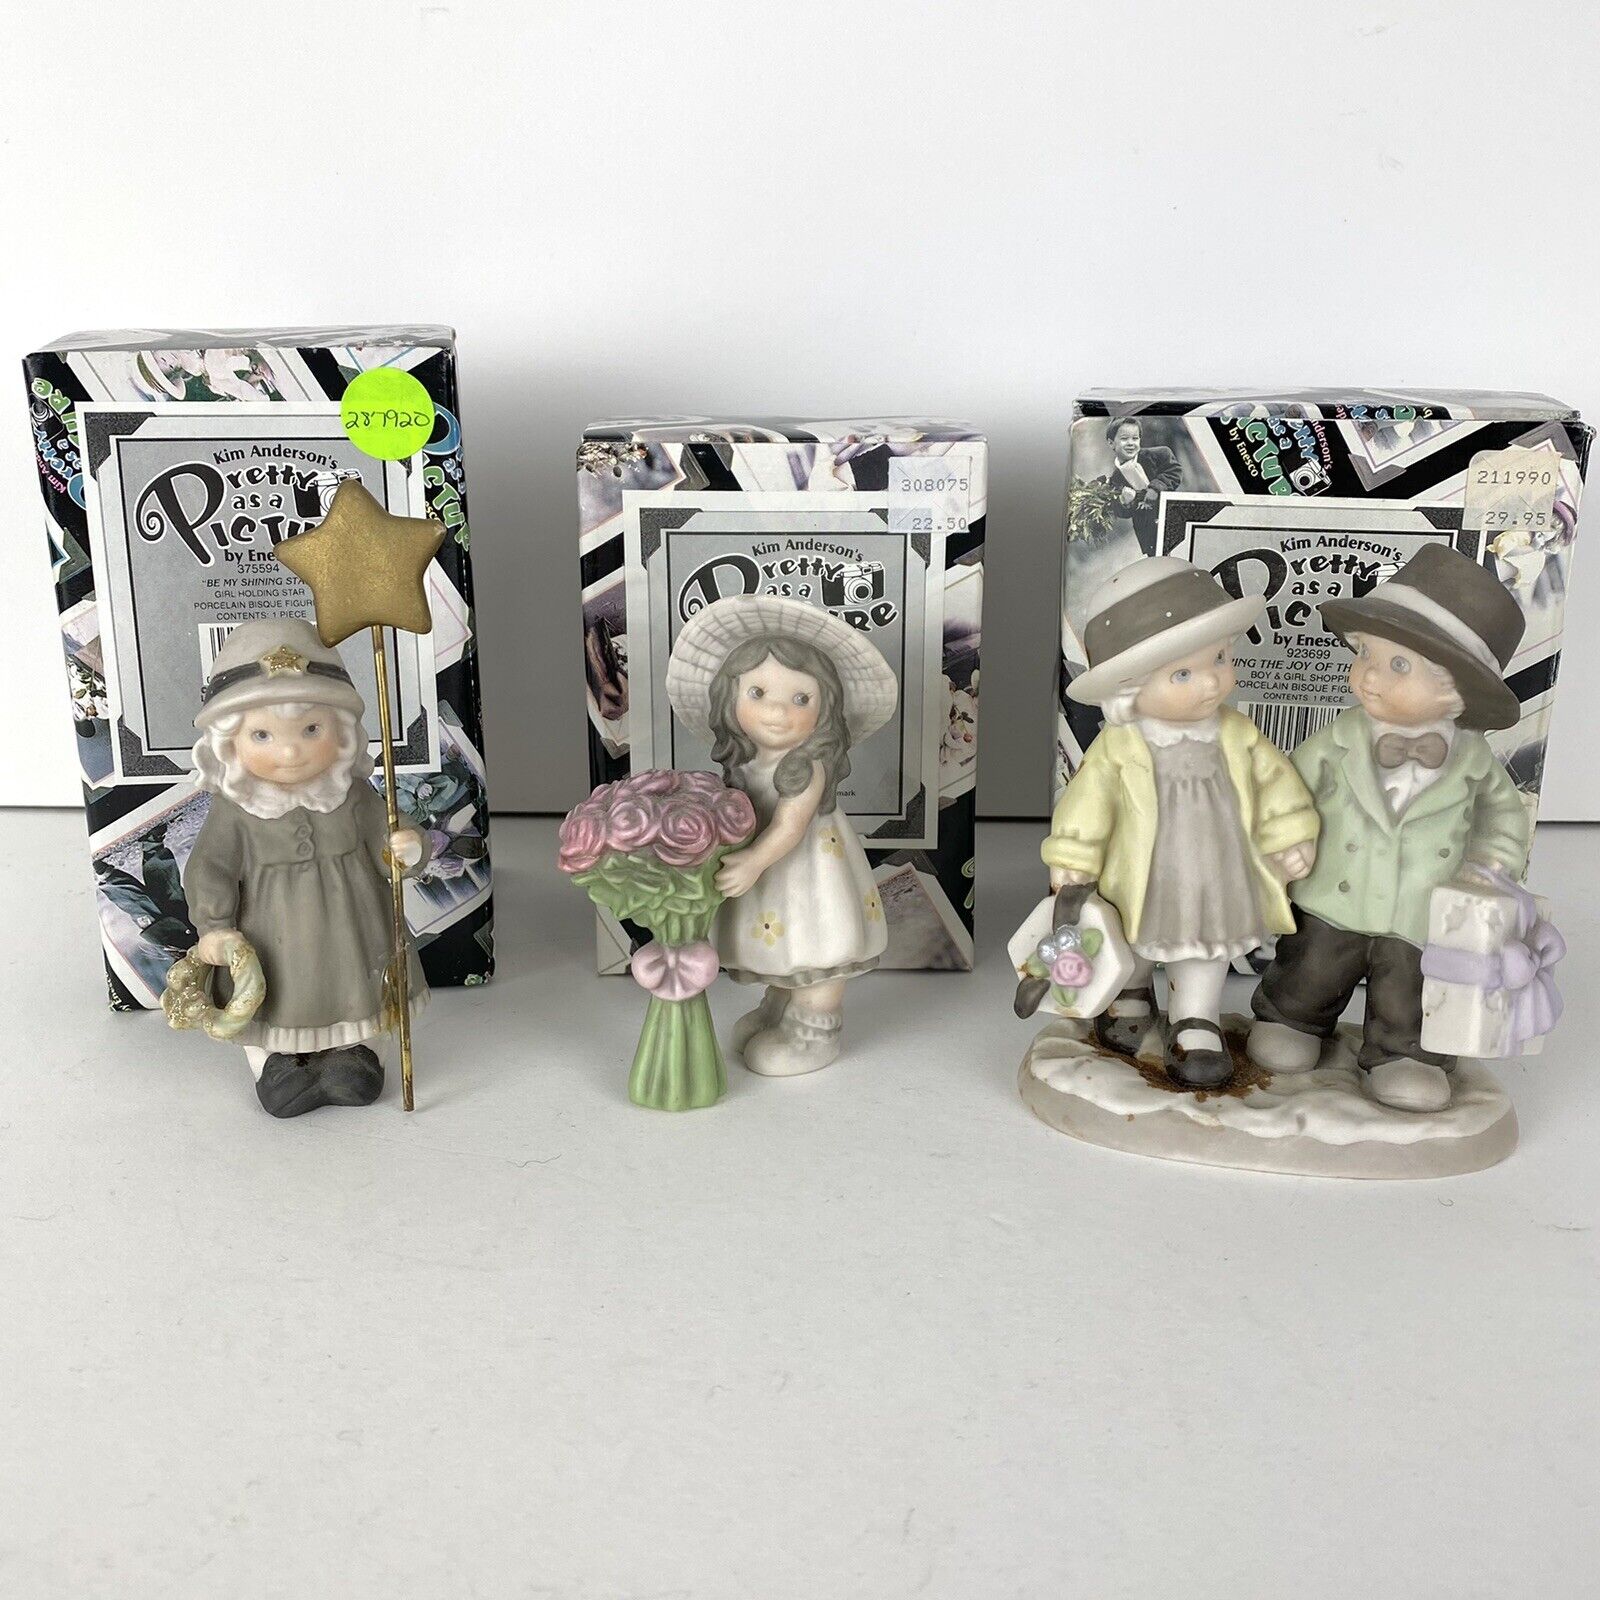 Kim Anderson’s Pretty as a Picture Figurines Set 3 Shining Sharing Sweetest